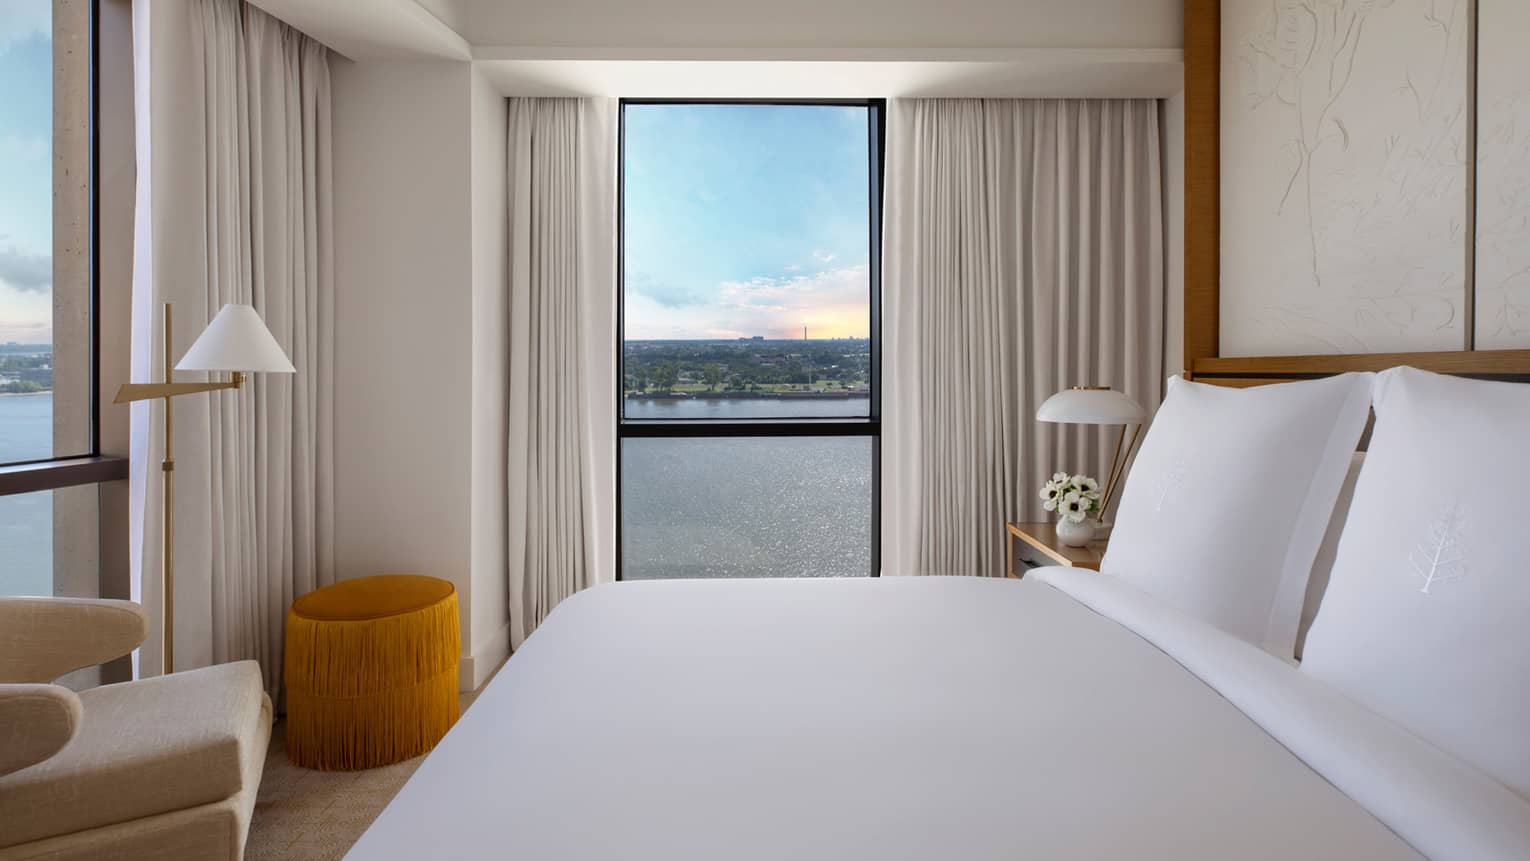 Luxurious guest room at Four Seasons with a king-size bed, modern décor and a panoramic river view through large windows